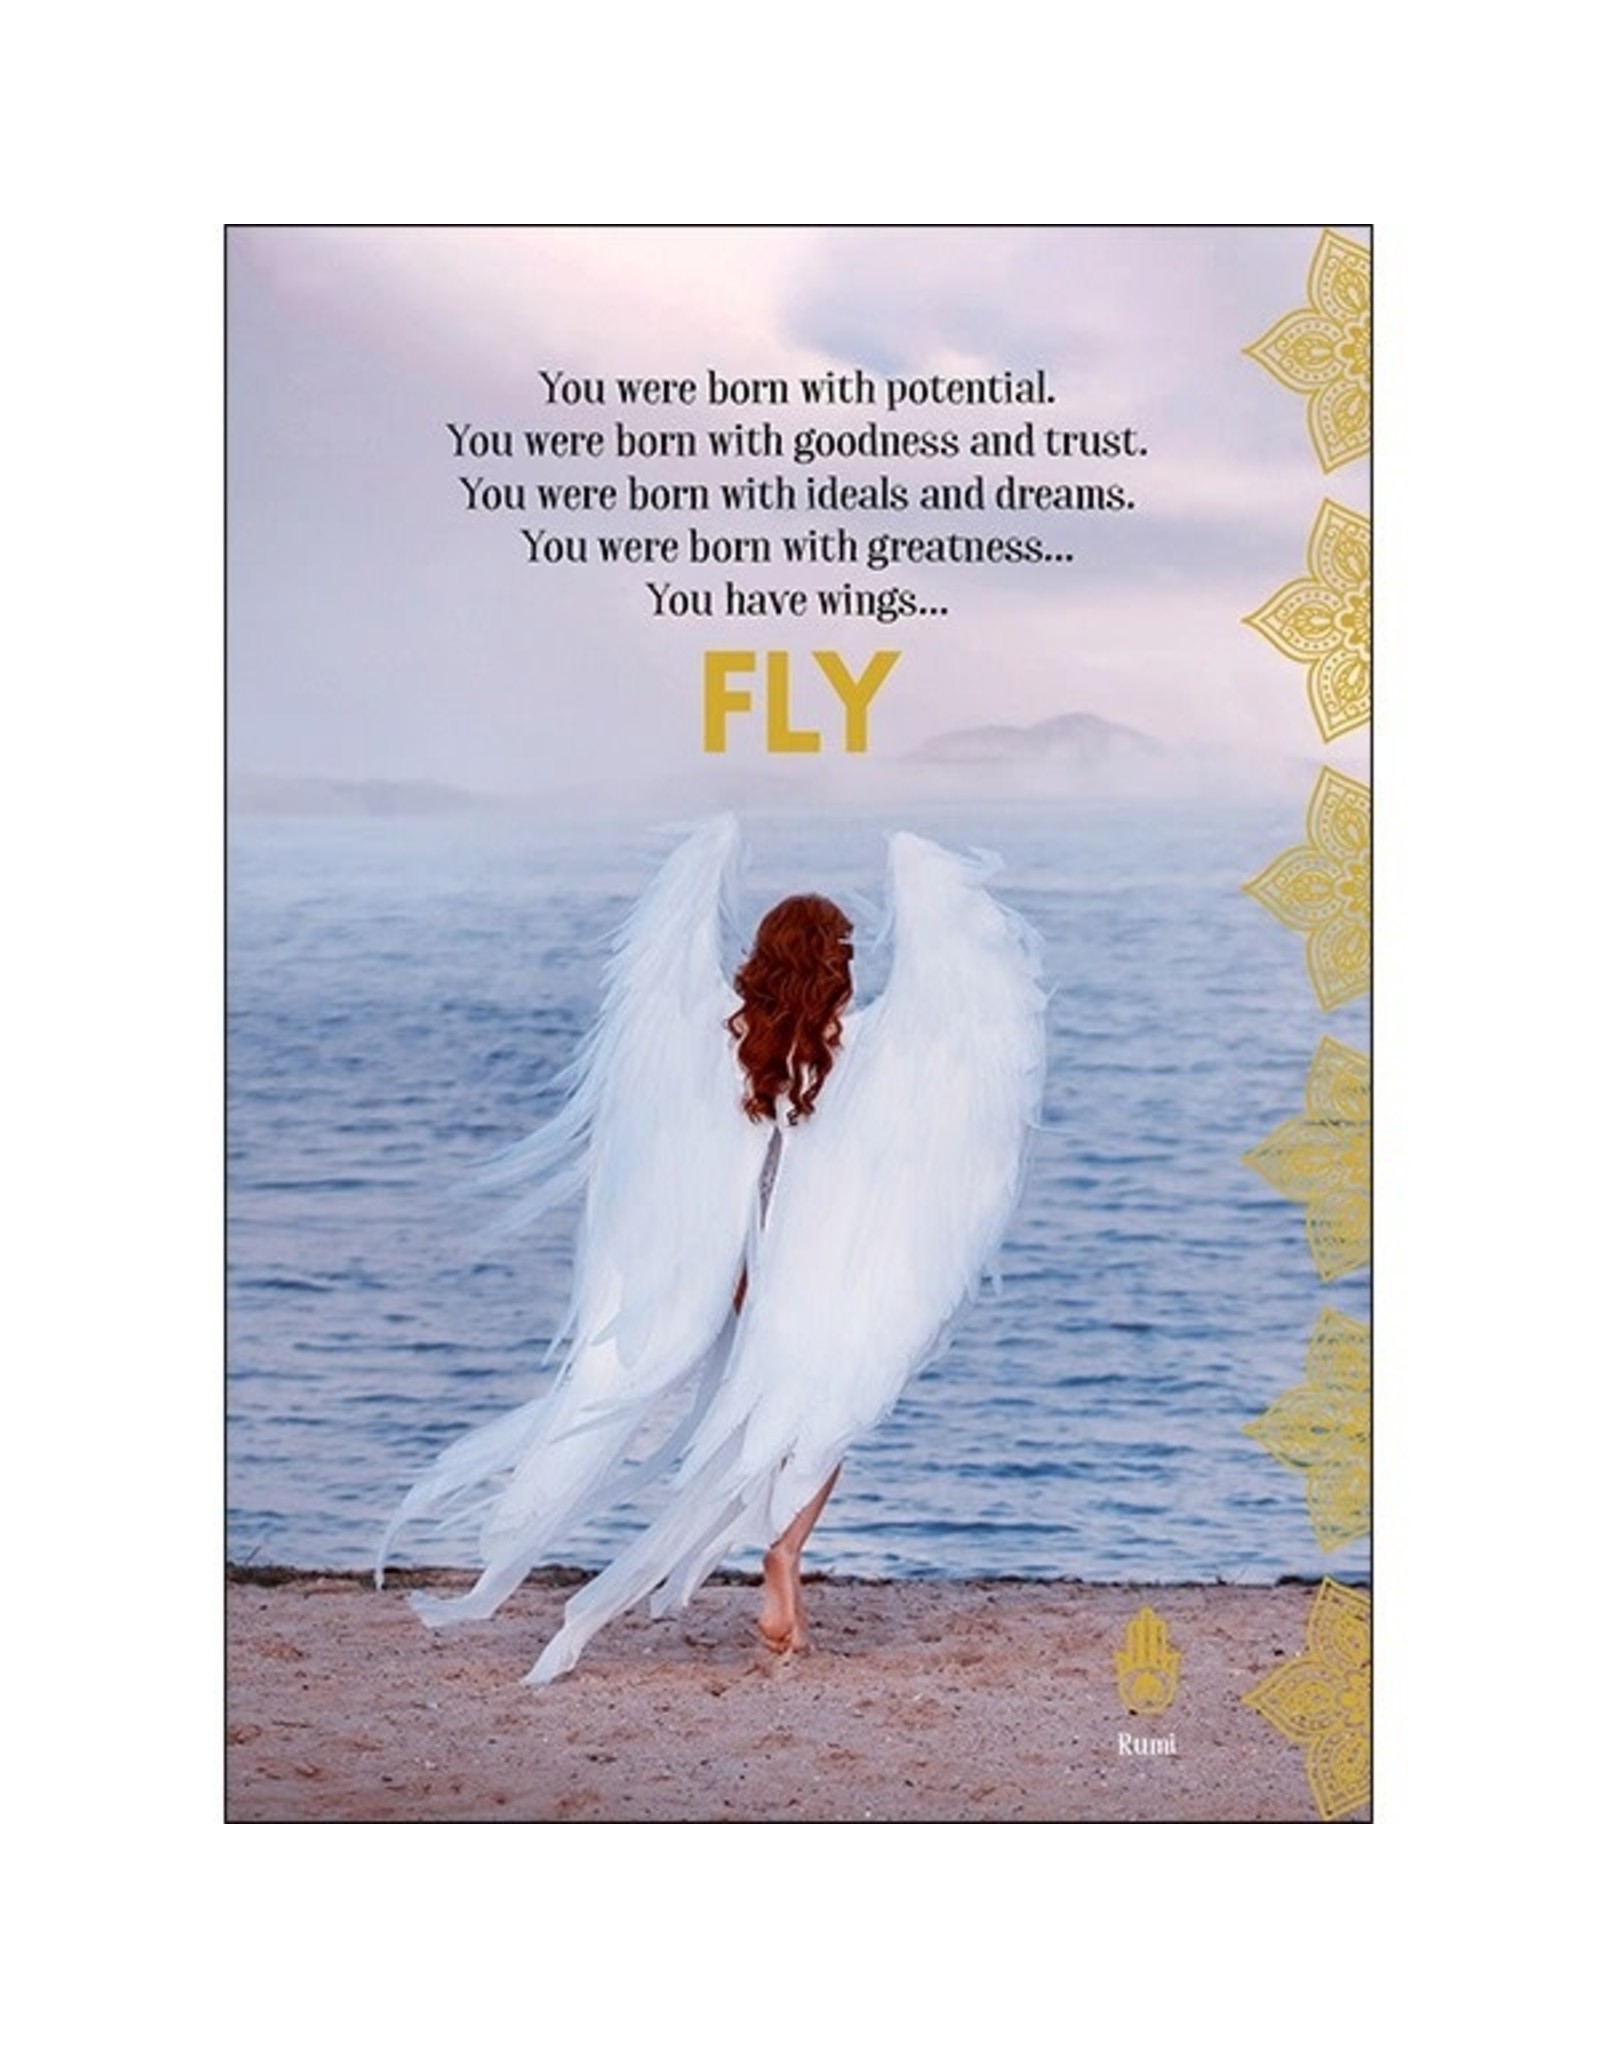 Affirmations Publishing House Fly Spiritual Greeting Card